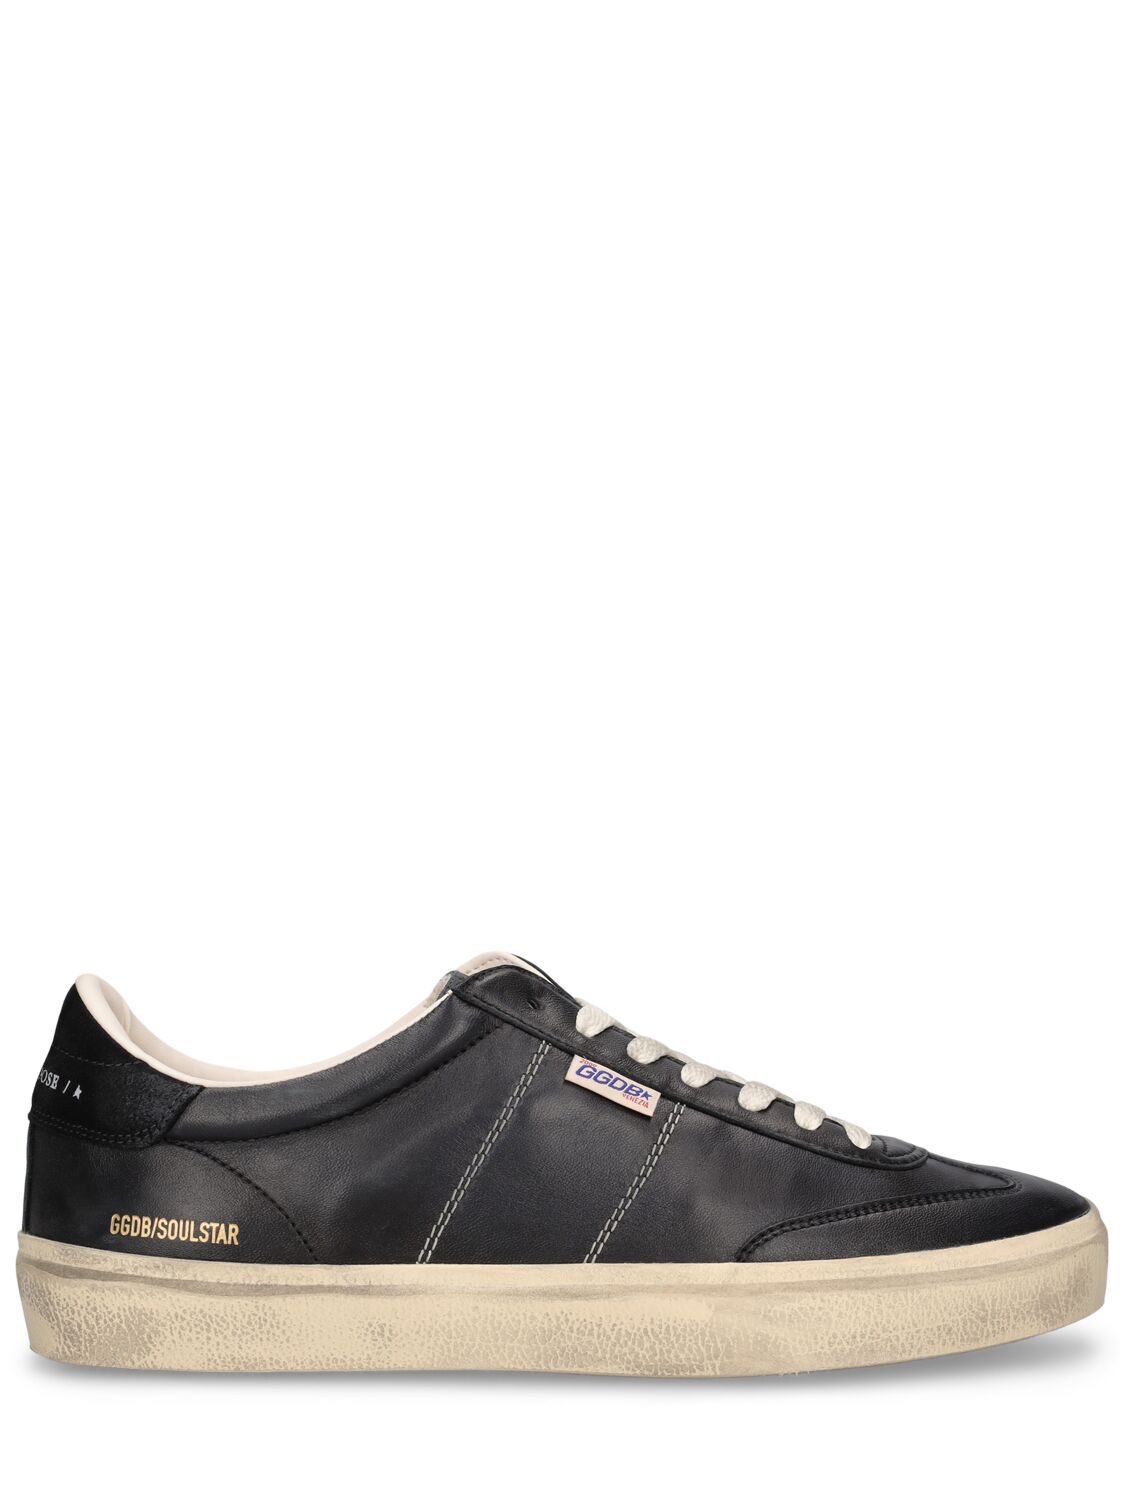 Image of 20mm Soul Star Leather Sneakers